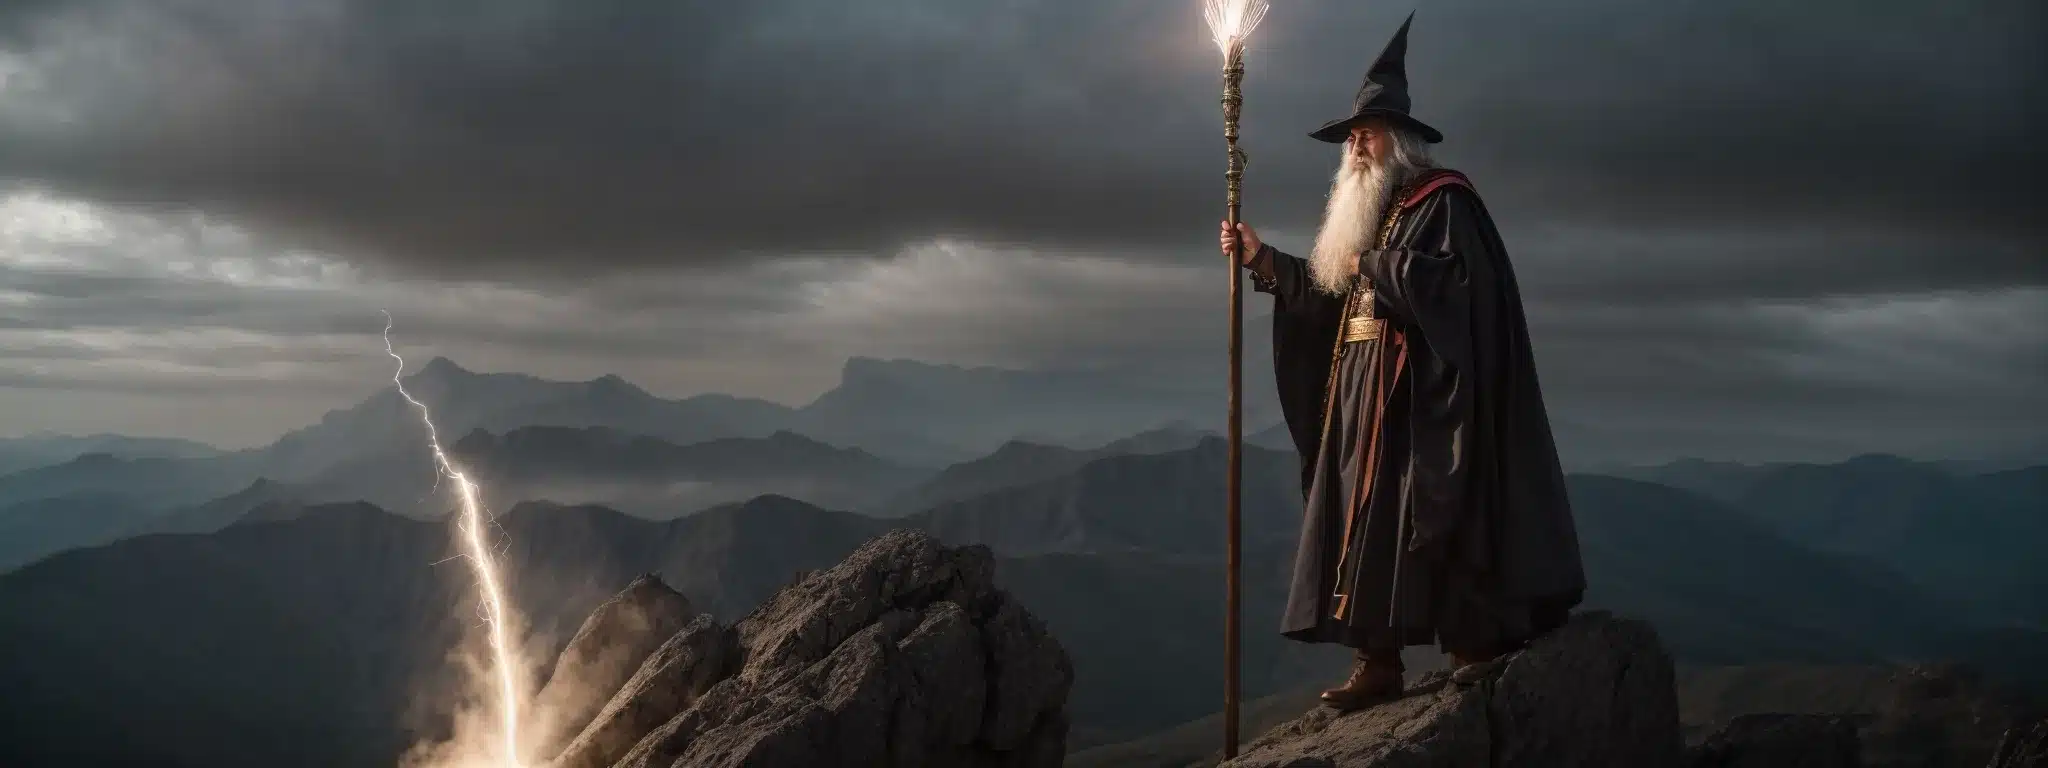 A Wizard With A Staff Is Triumphantly Standing Atop A Mountain, With A Fast Stream Of Light Representing Speed And Efficiency Swirling Around Him.